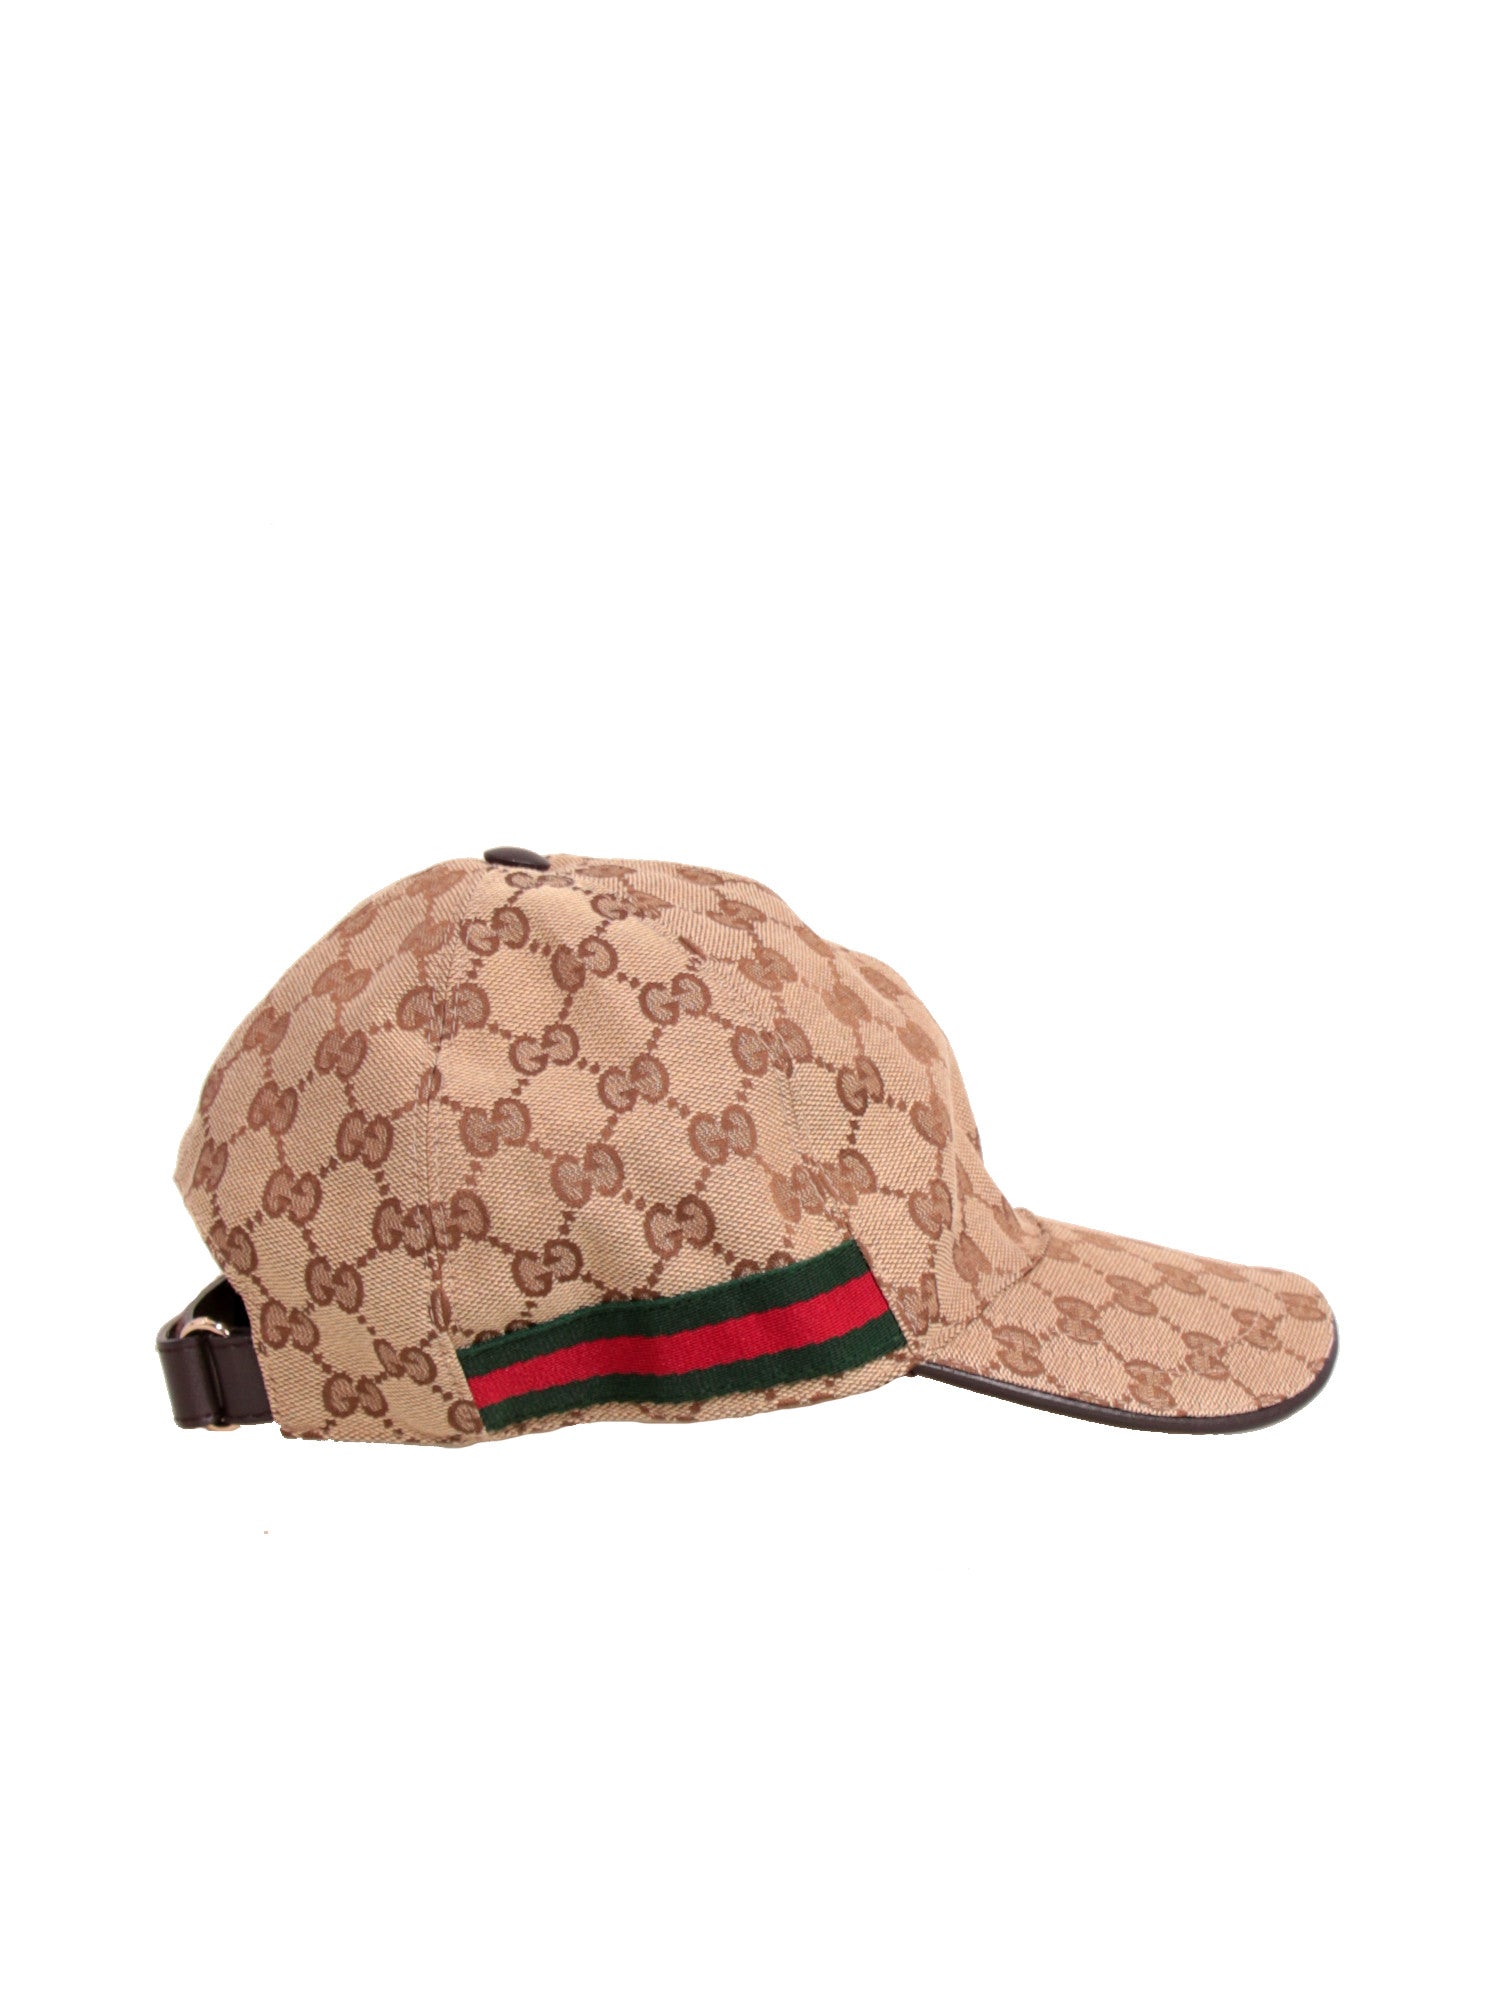 GUCCI - BASEBALL CAP WITH ORIGINAL GG FABRIC WEB AND LEATHER